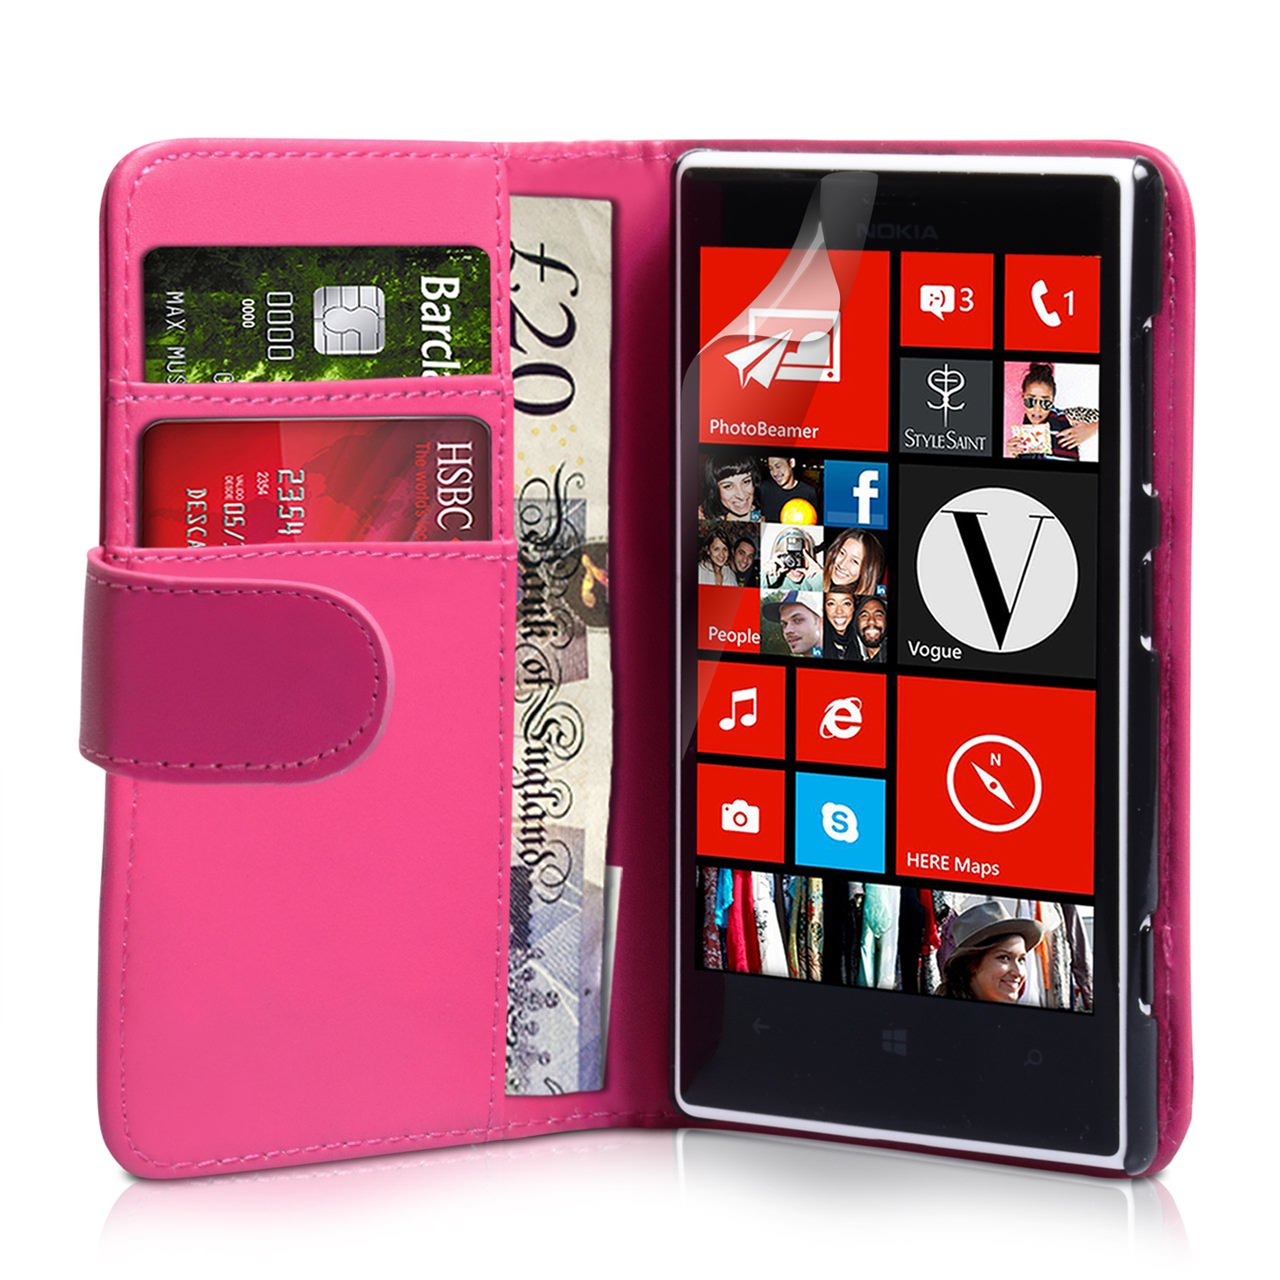 YouSave Nokia Lumia 720 Leather Effect Wallet Case - Hot Pink